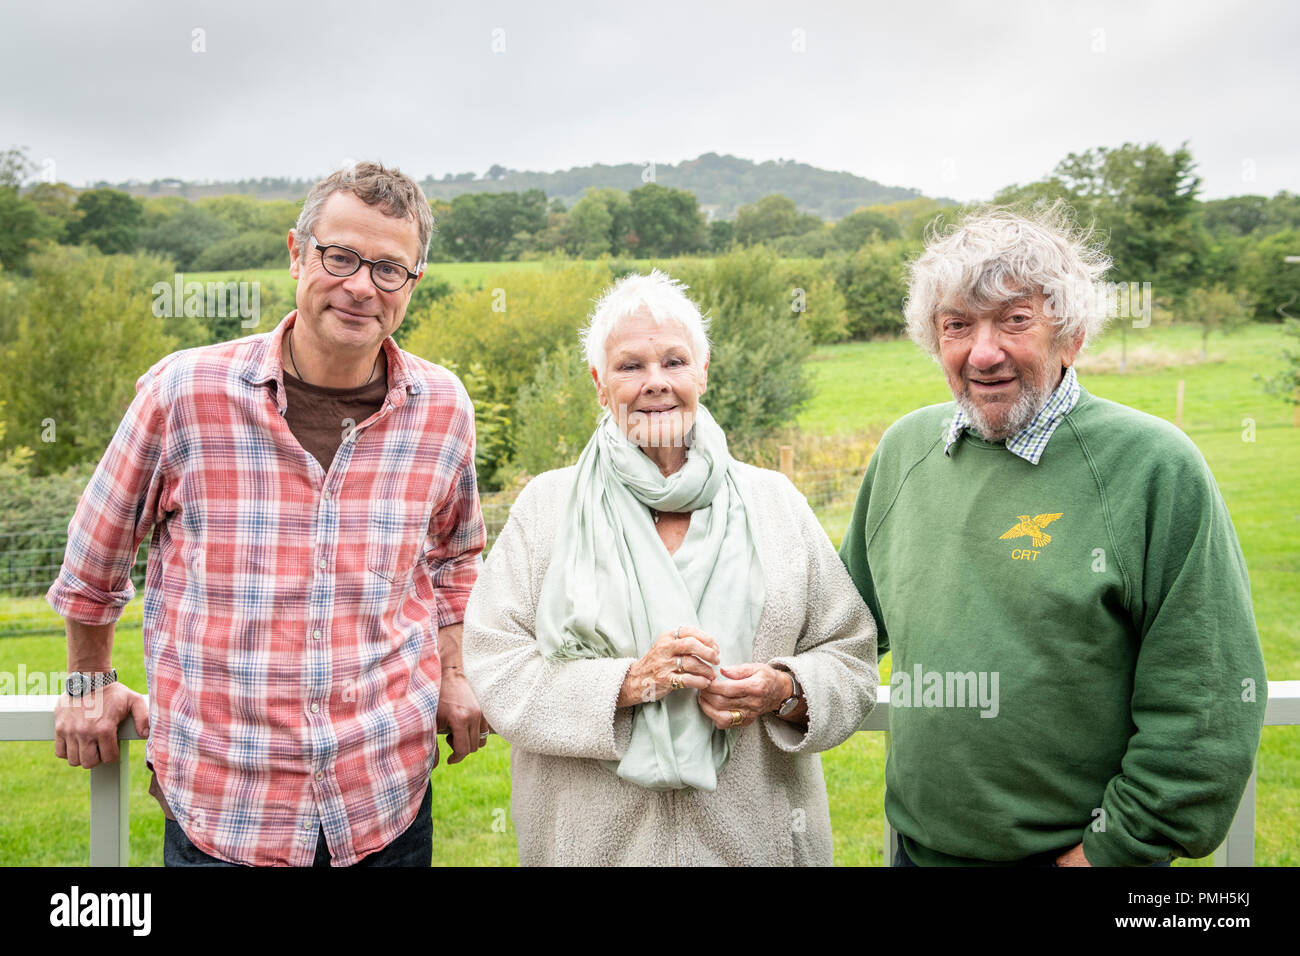 Babers Farm, Marshwood, Dorset UK 18th September 2018. Dame Judi Dench (Trust Patron), Hugh Fearnley-Whittingstall and Robin Page (Trust Chairman) meet at the Countryside Restoration Trust Farm. This was one of several events marking the 25th Anniversary of the Trust whose aim is for conservation improvements to be carried out alongside practical farming and land management. Credit: Julian Eales/Alamy Live News Stock Photo